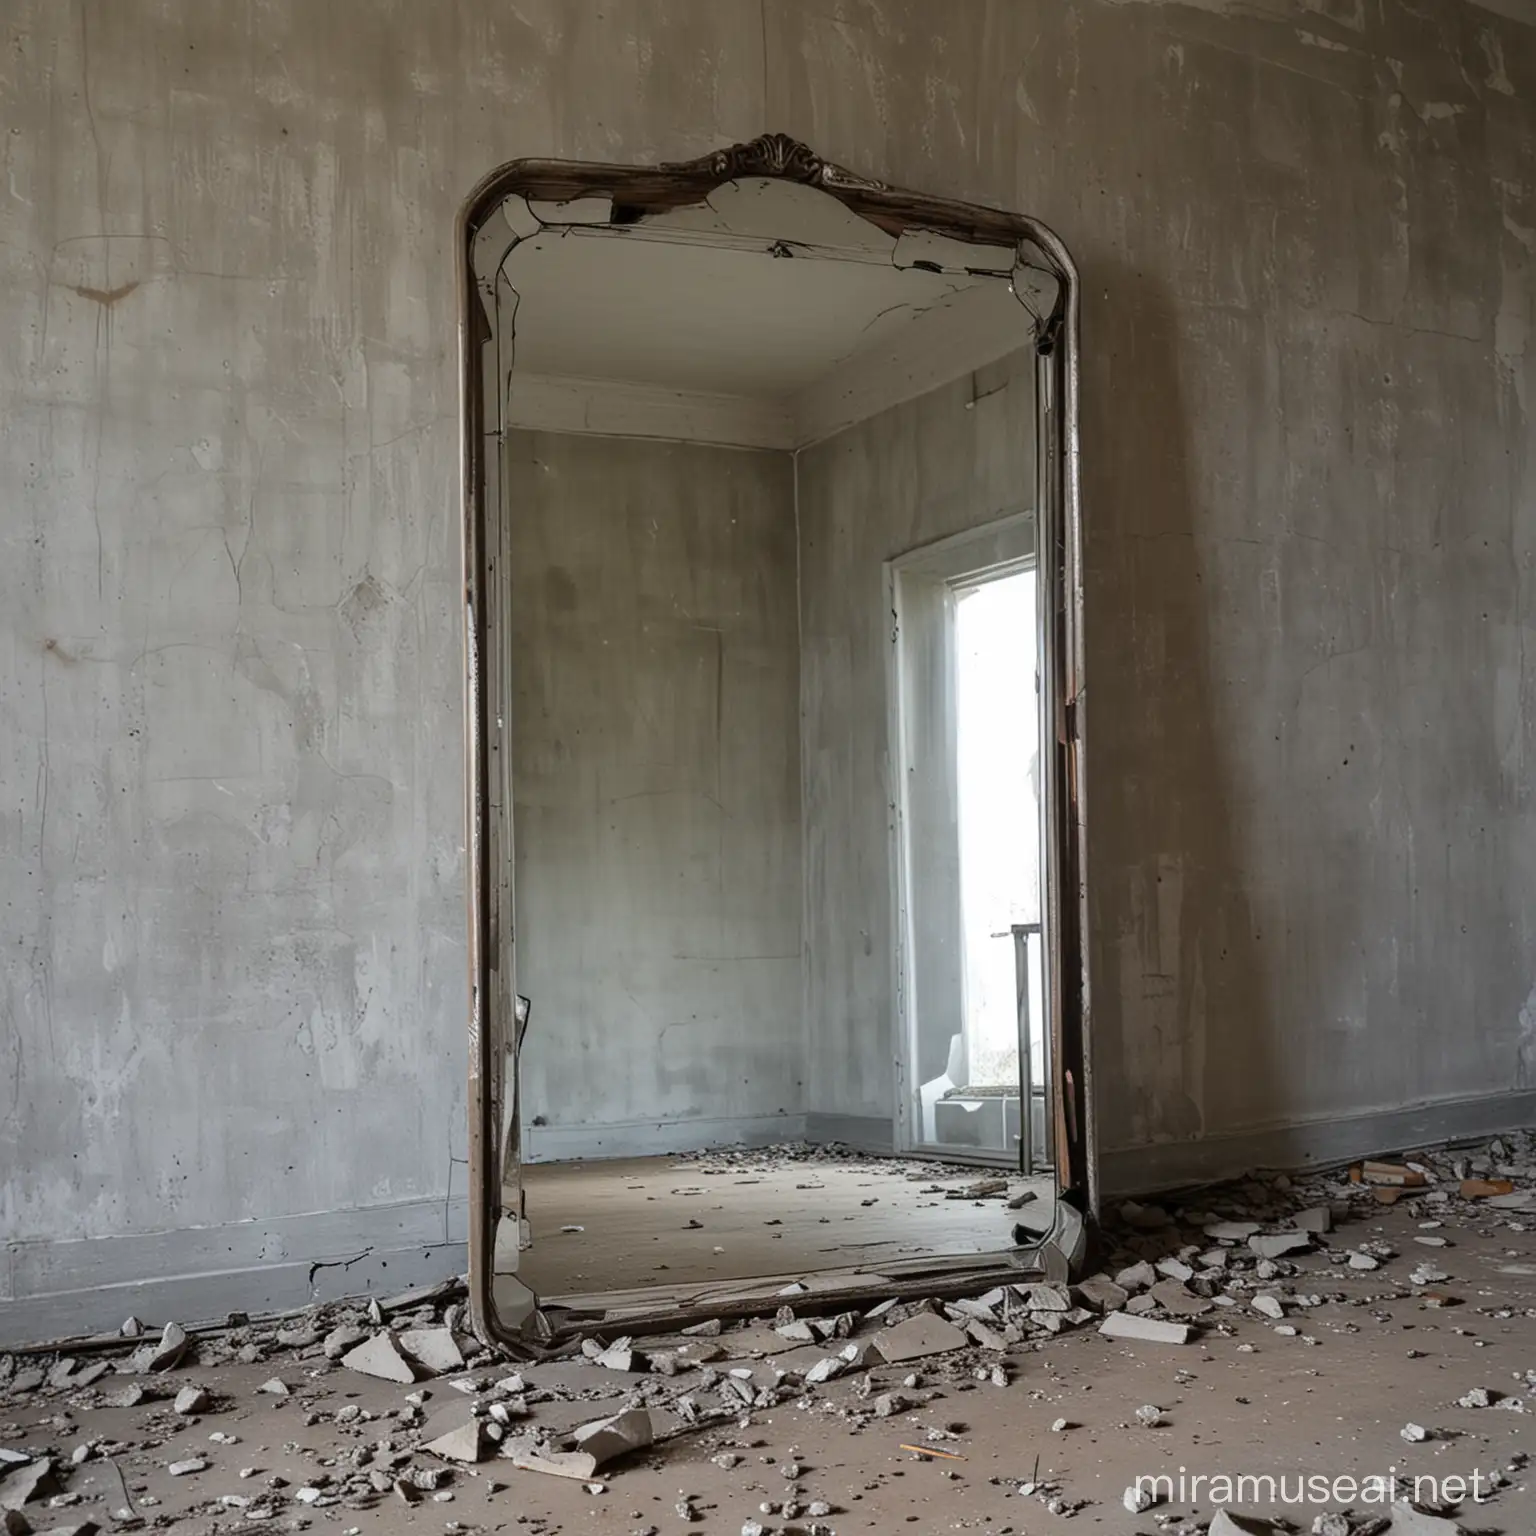 Cracked Standing Mirror in Abandoned Building